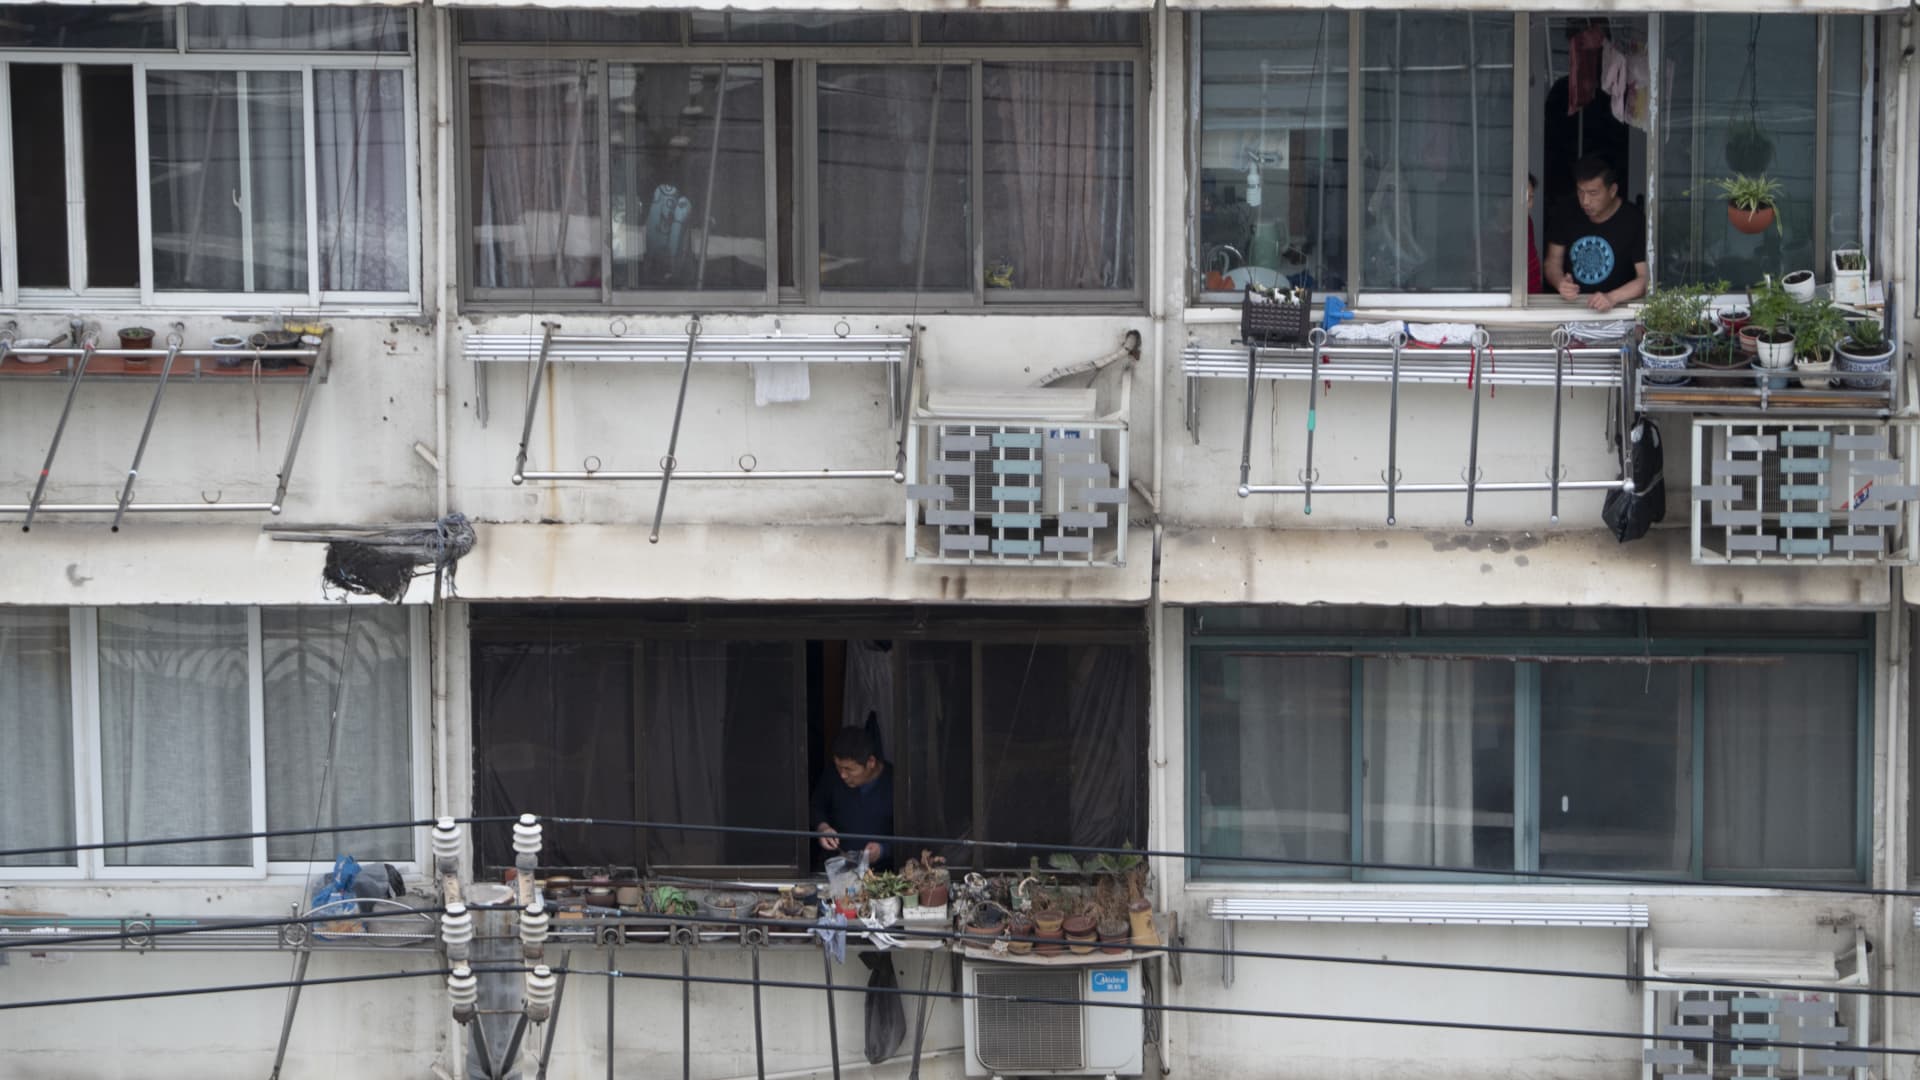 Resident in a so-called containment building looking out of their balconies on April 24, 2022 in Shanghai, China as the city battles its worst Covid outbreak since the start of the pandemic.